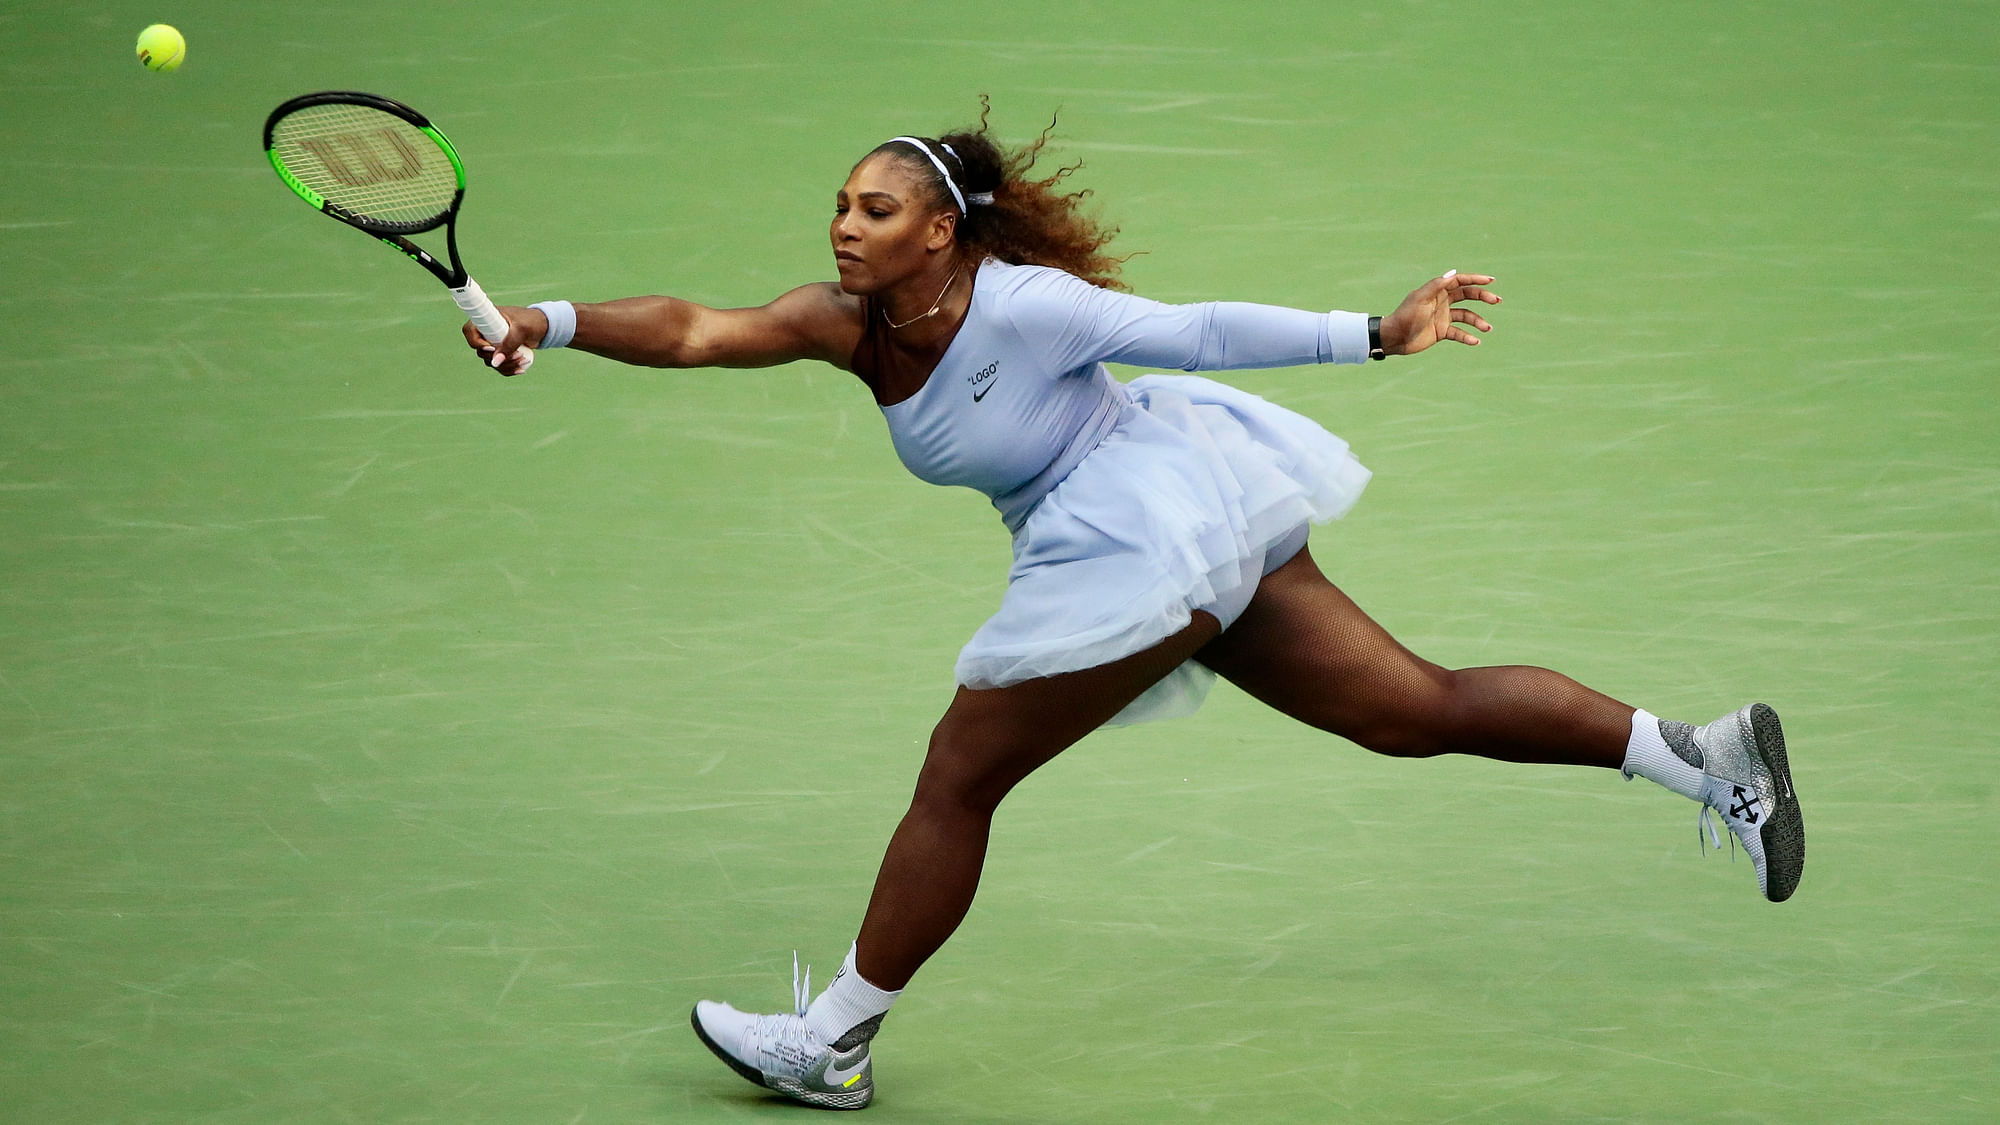 Serena Williams will be playing Naomi Osaka in the US Open women’s singles final.